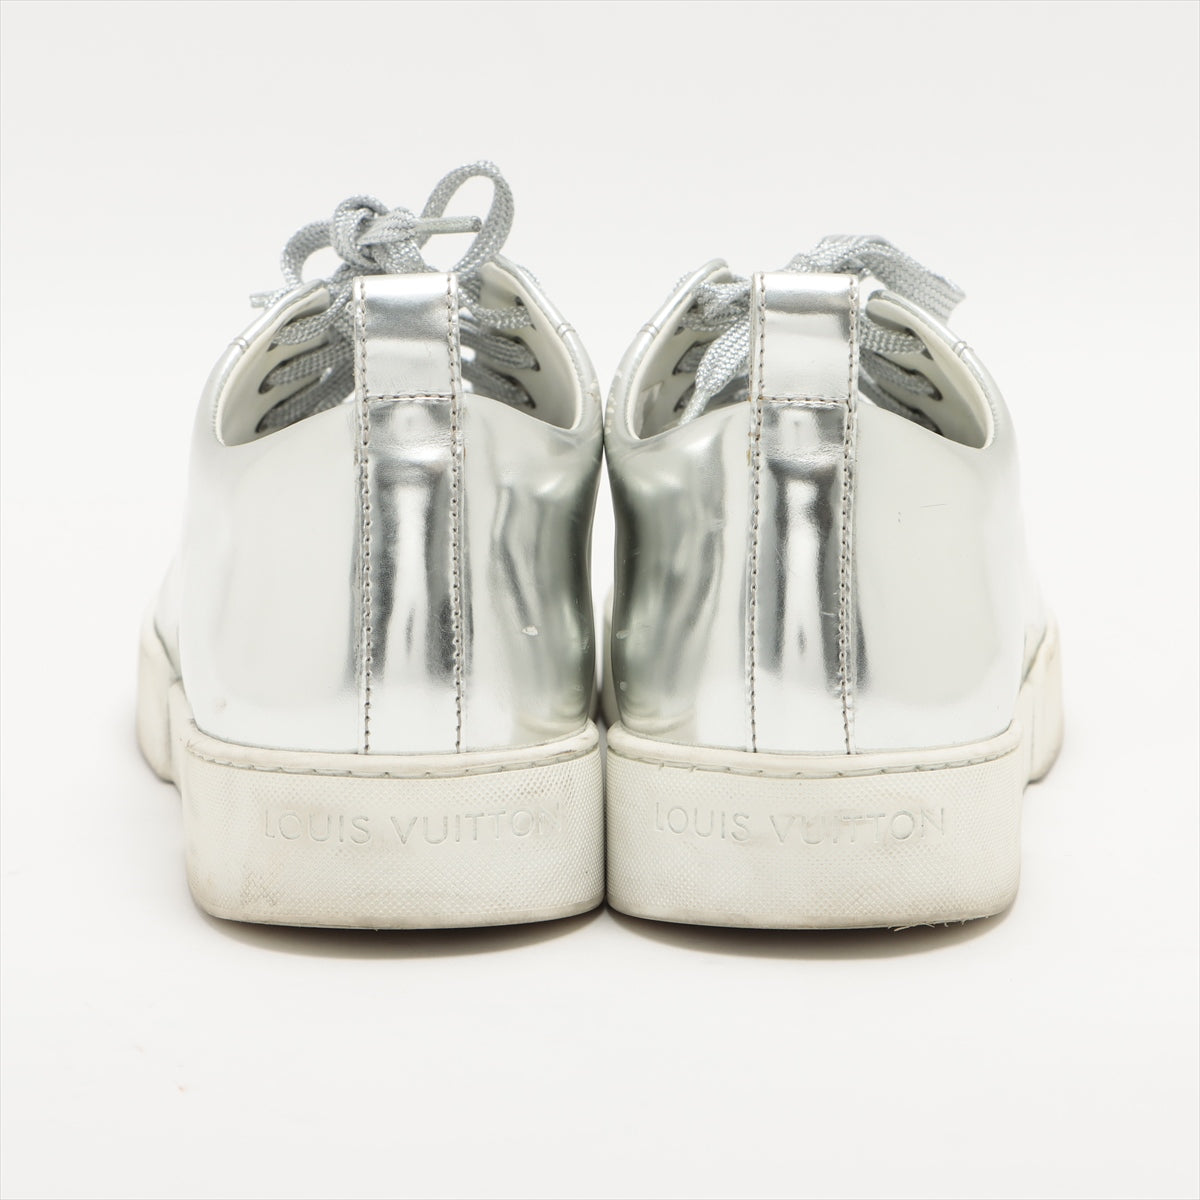 Louis Vuitton Leather Sneakers 35 Ladies' Silver CL1106 Is there dirt on the insole